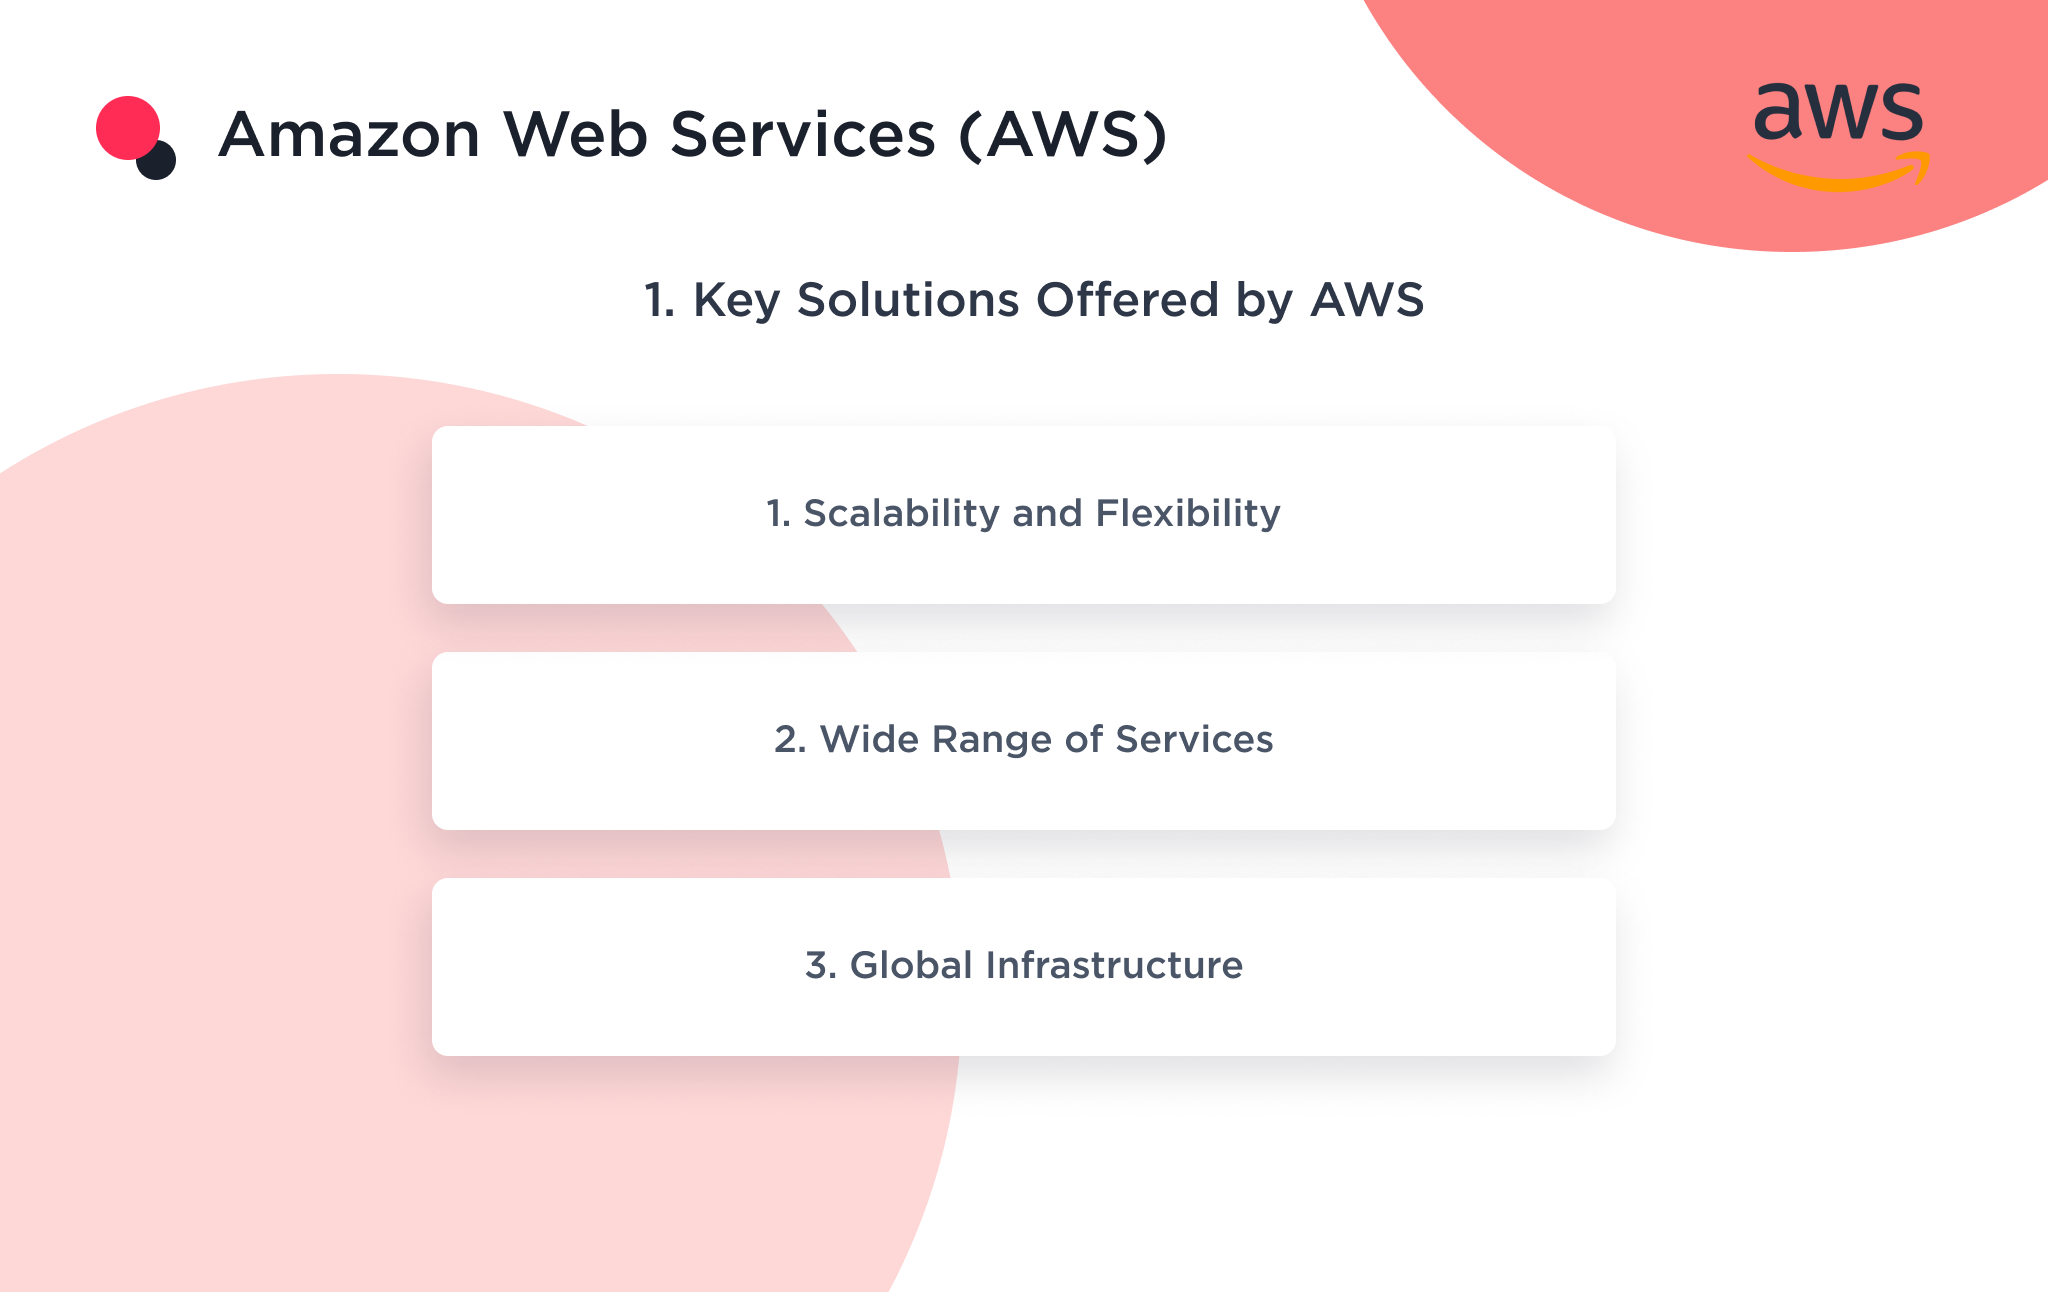 The key solutions offered by Amazon Web Services